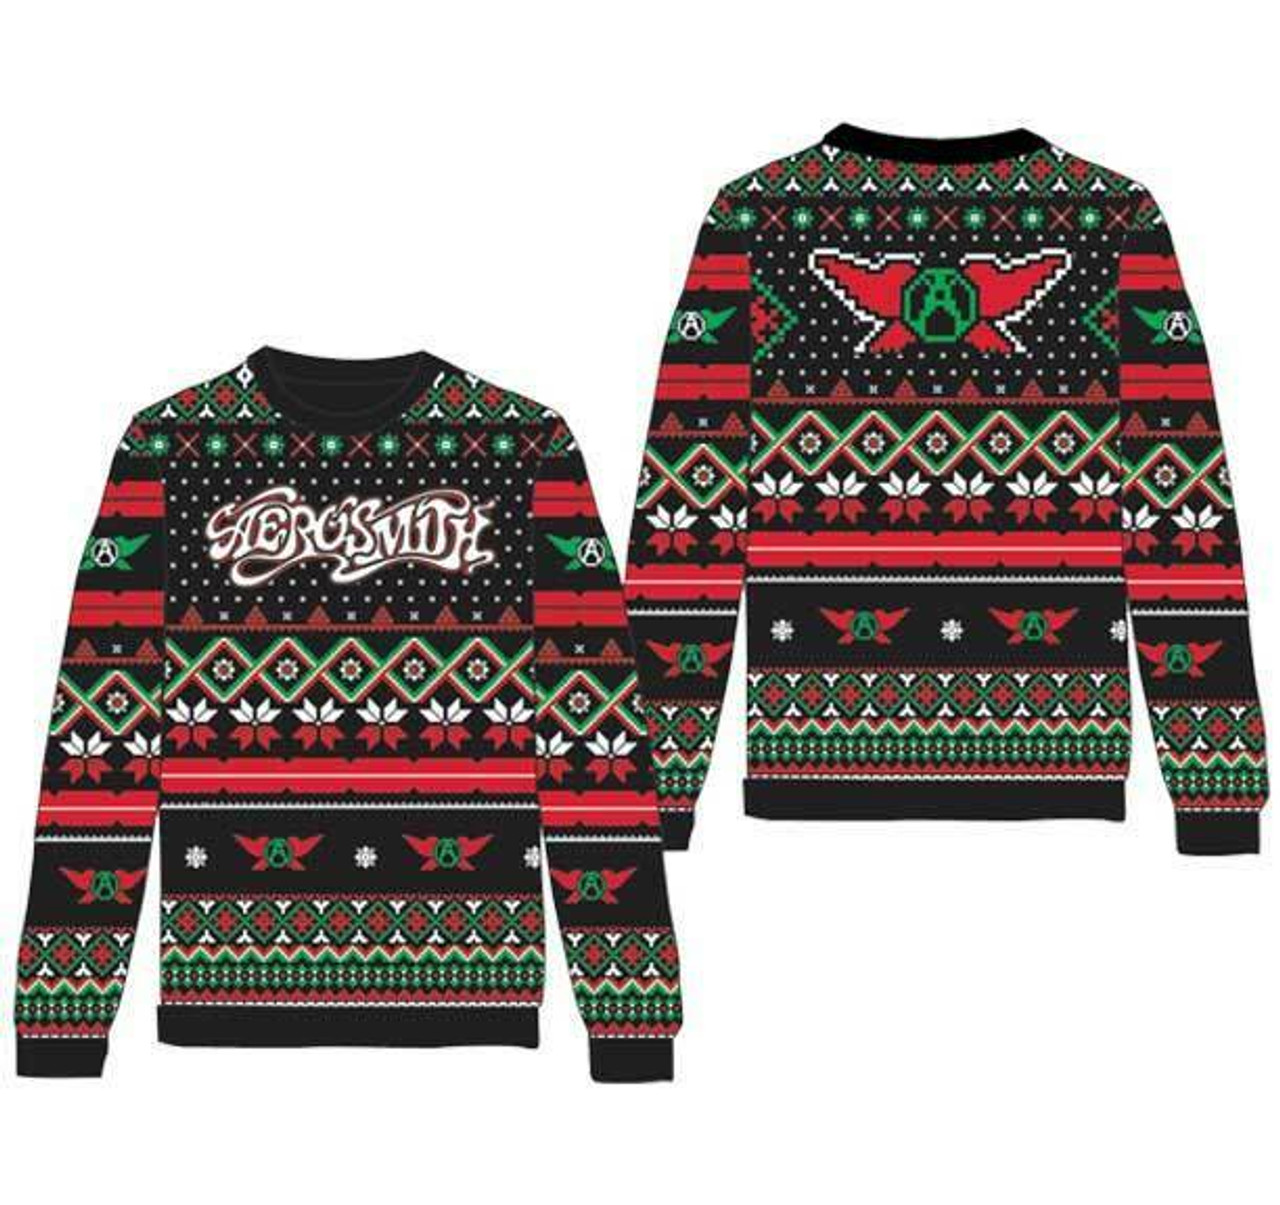 Band 838440093 - Roll Holiday Aerosmith Fearless Apparel Christmas Sweater and Rock Music Ugly